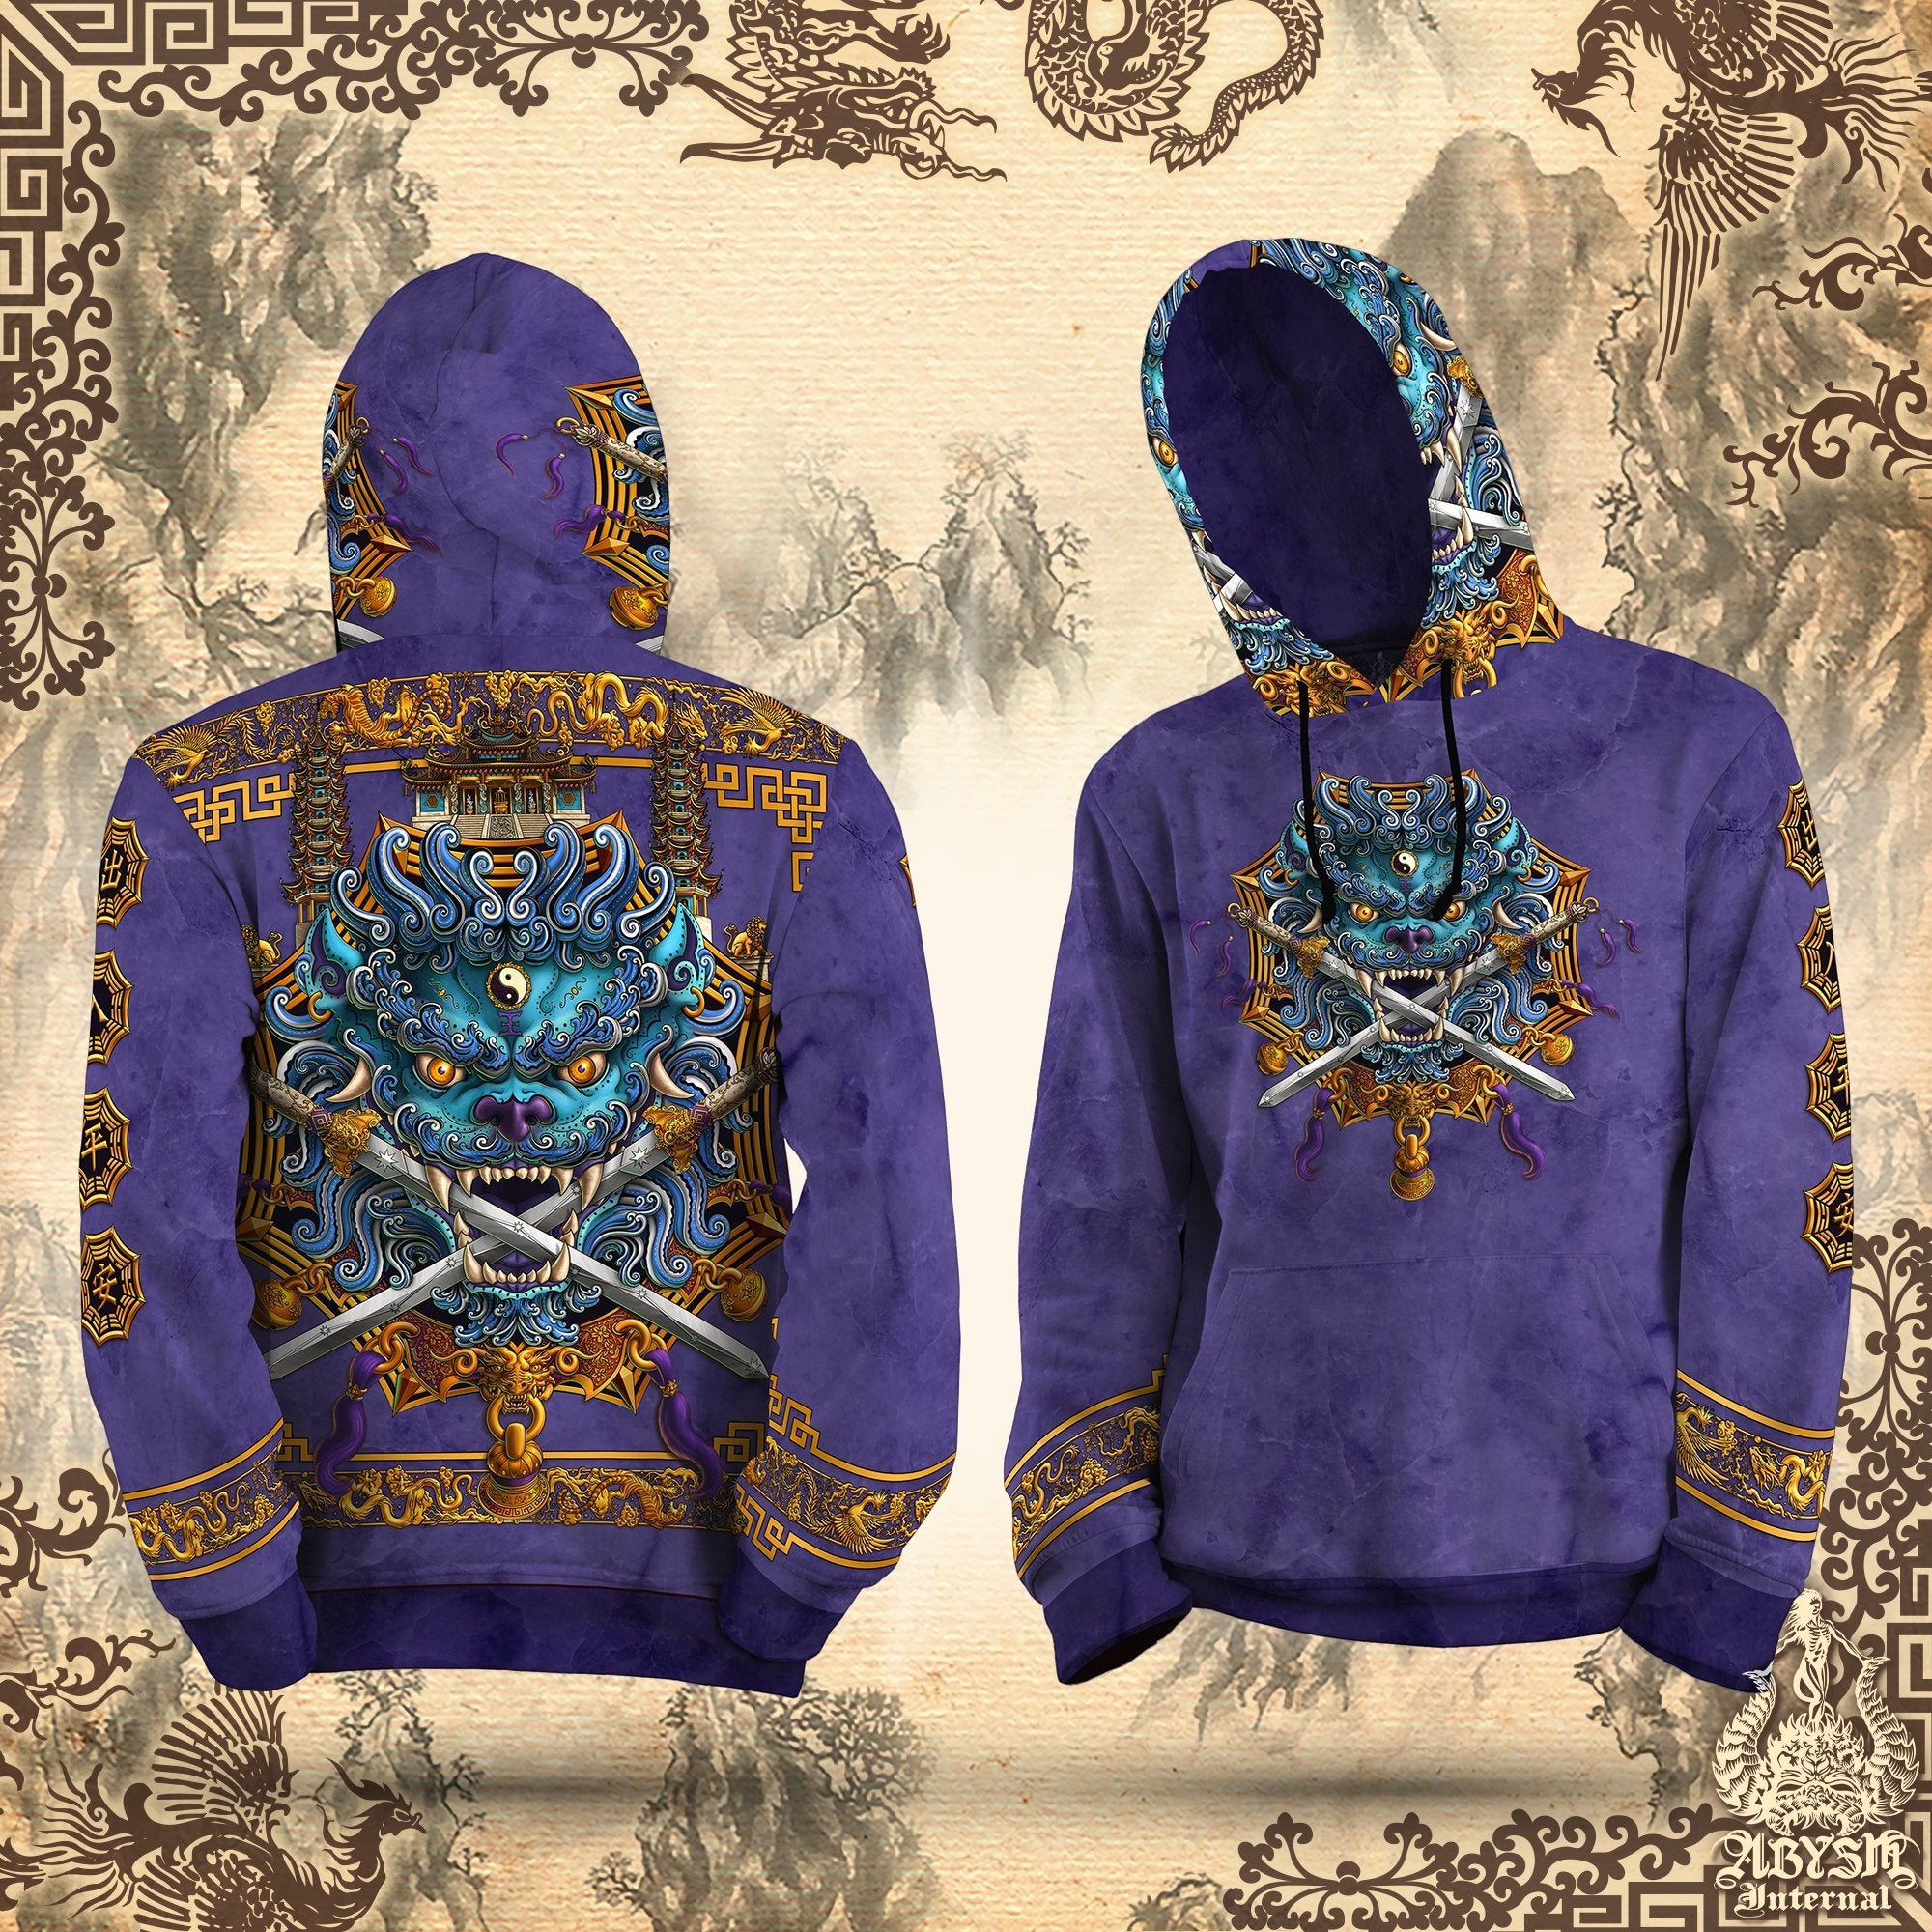 Lion Hoodie, Street Outfit, Chinese Streetwear, Taiwan Sword Lion, Asian Art Apparel, Alternative Clothing, Unisex - Blue and Purple - Abysm Internal